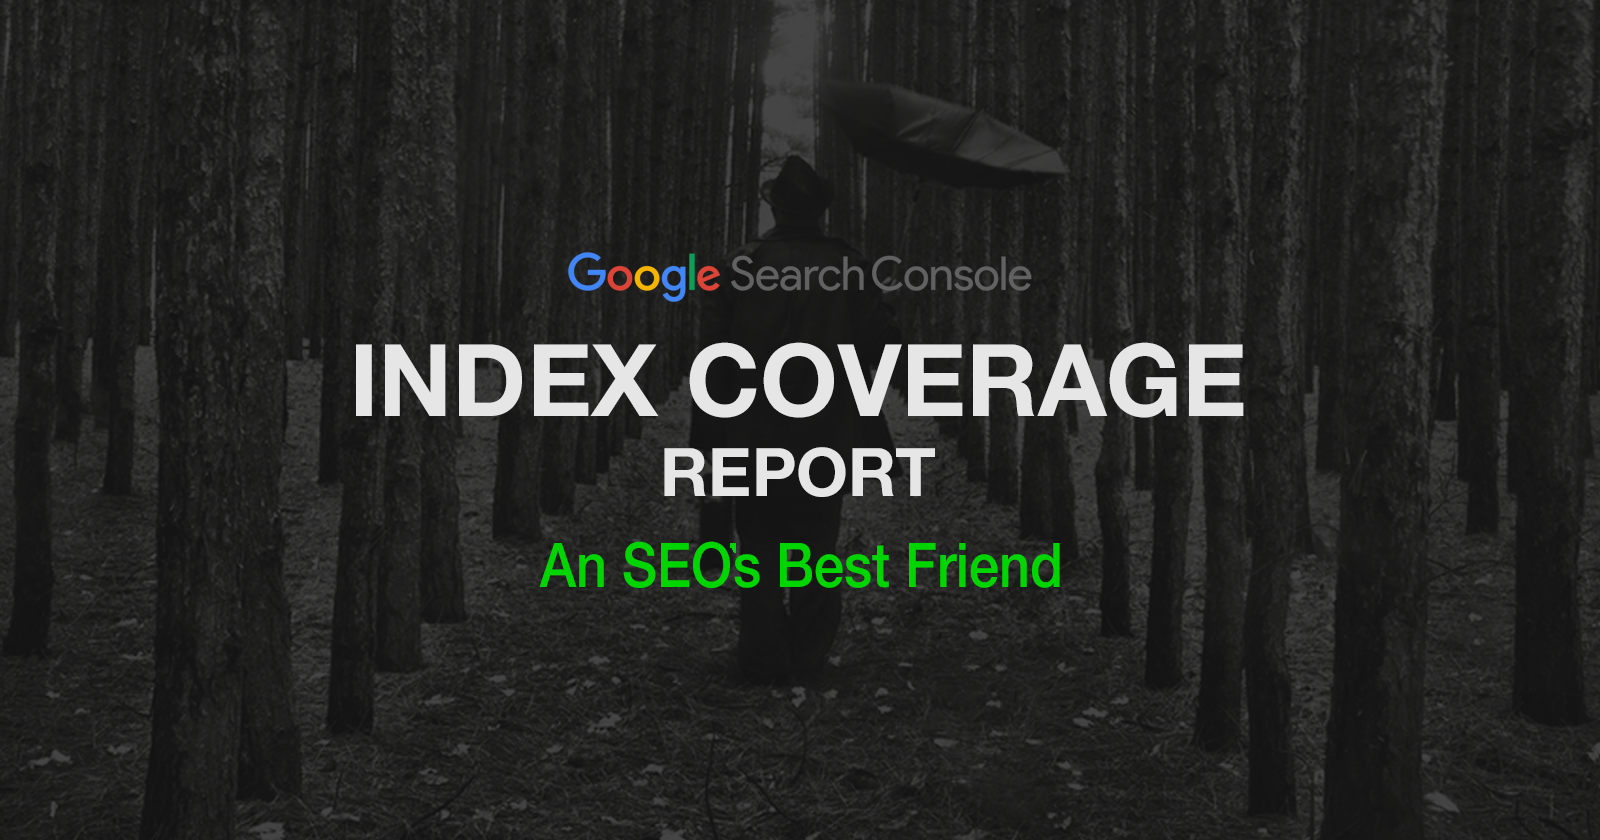 search-console-index-coverage-report-an-seos-best-friend-5e397690ed31c.png